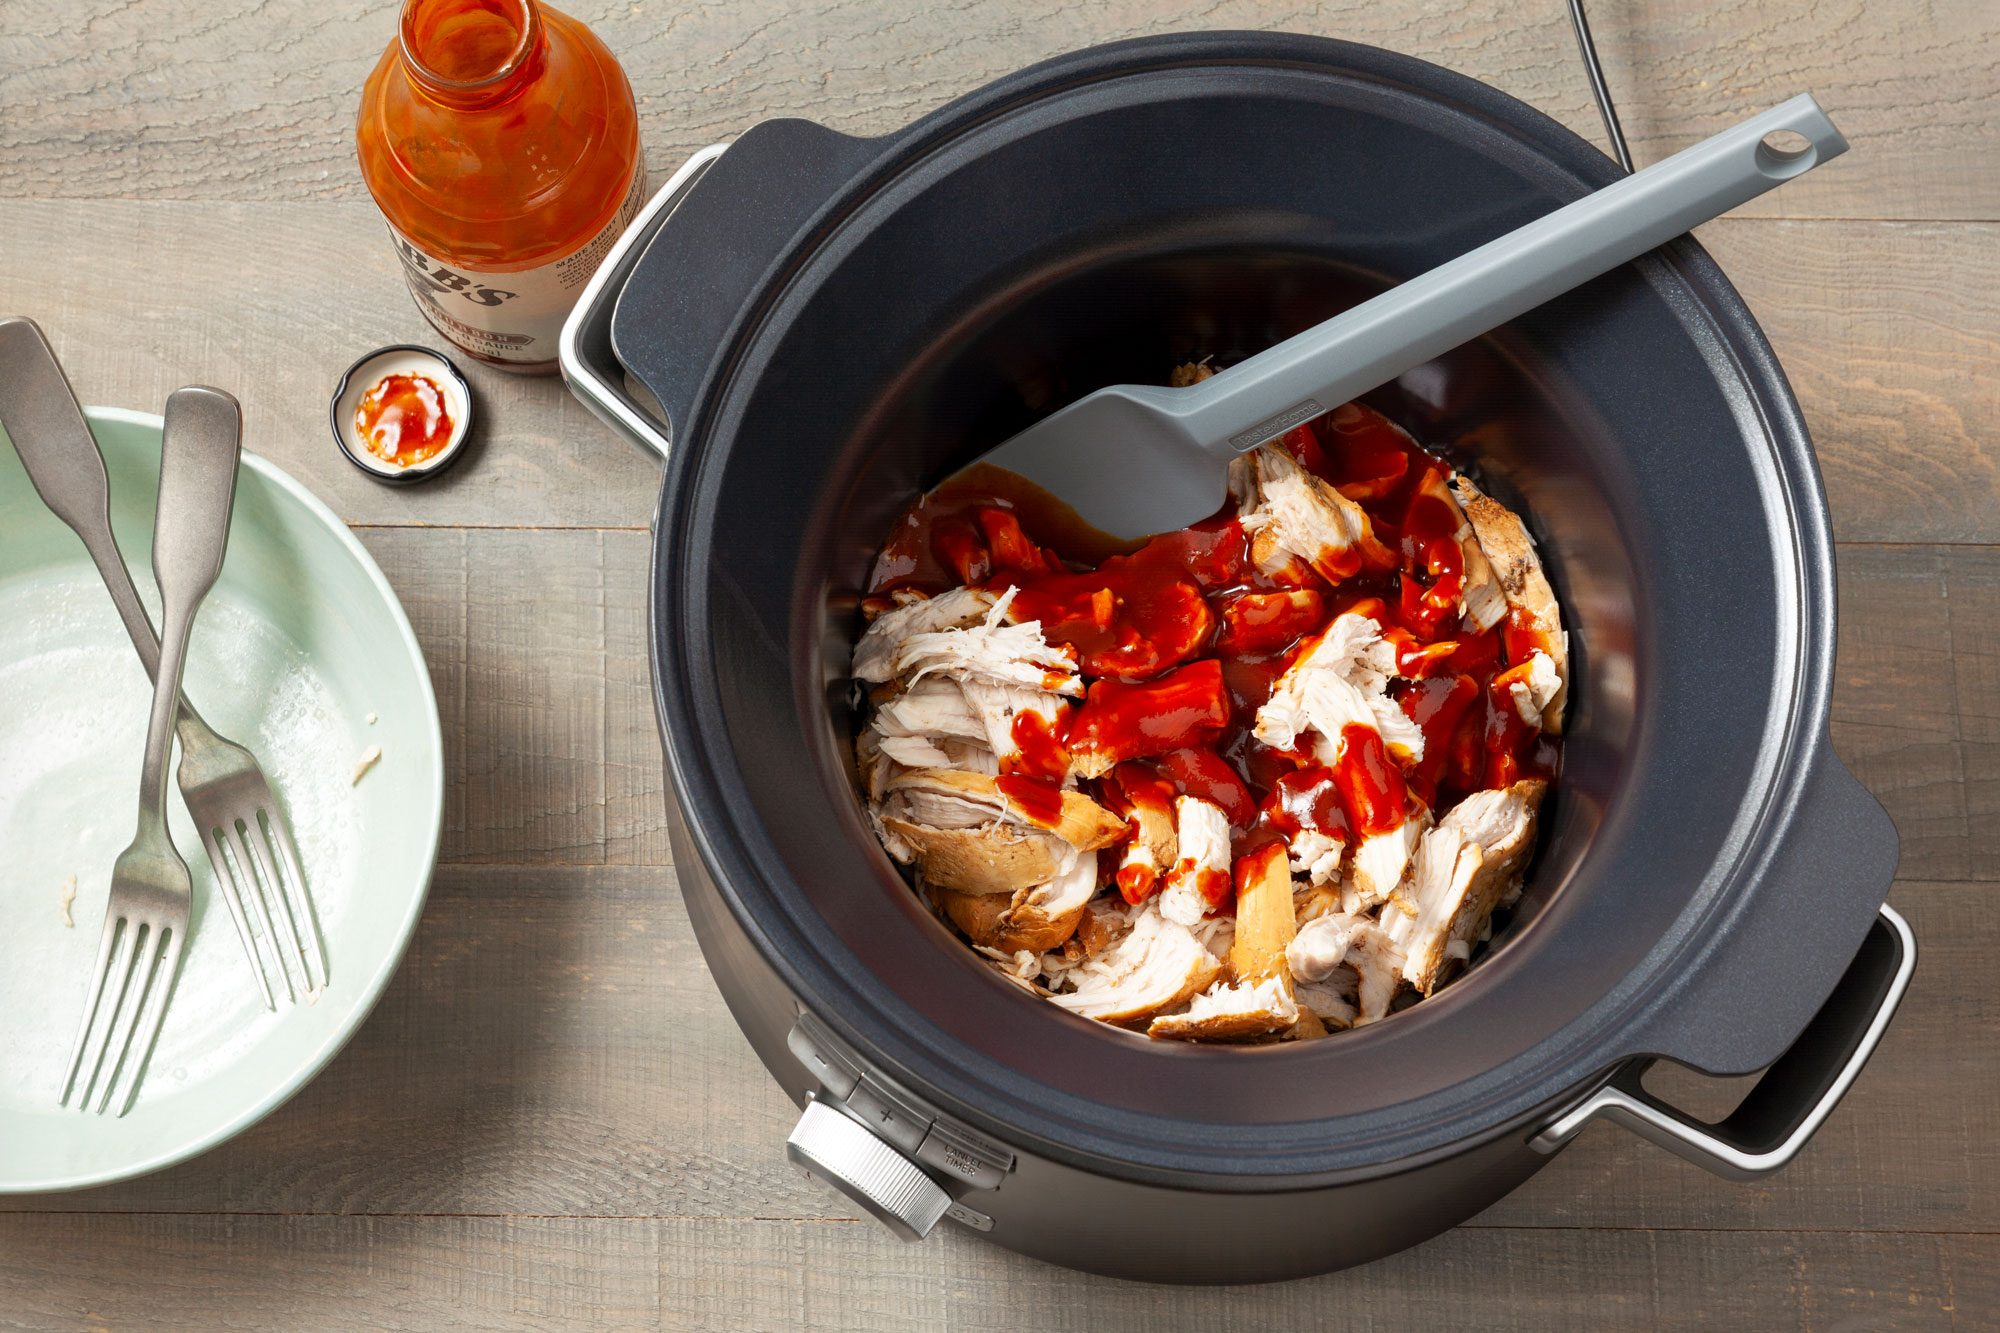 Chicken with Barbecue Sauce over it in a slow cooker on wooden surface